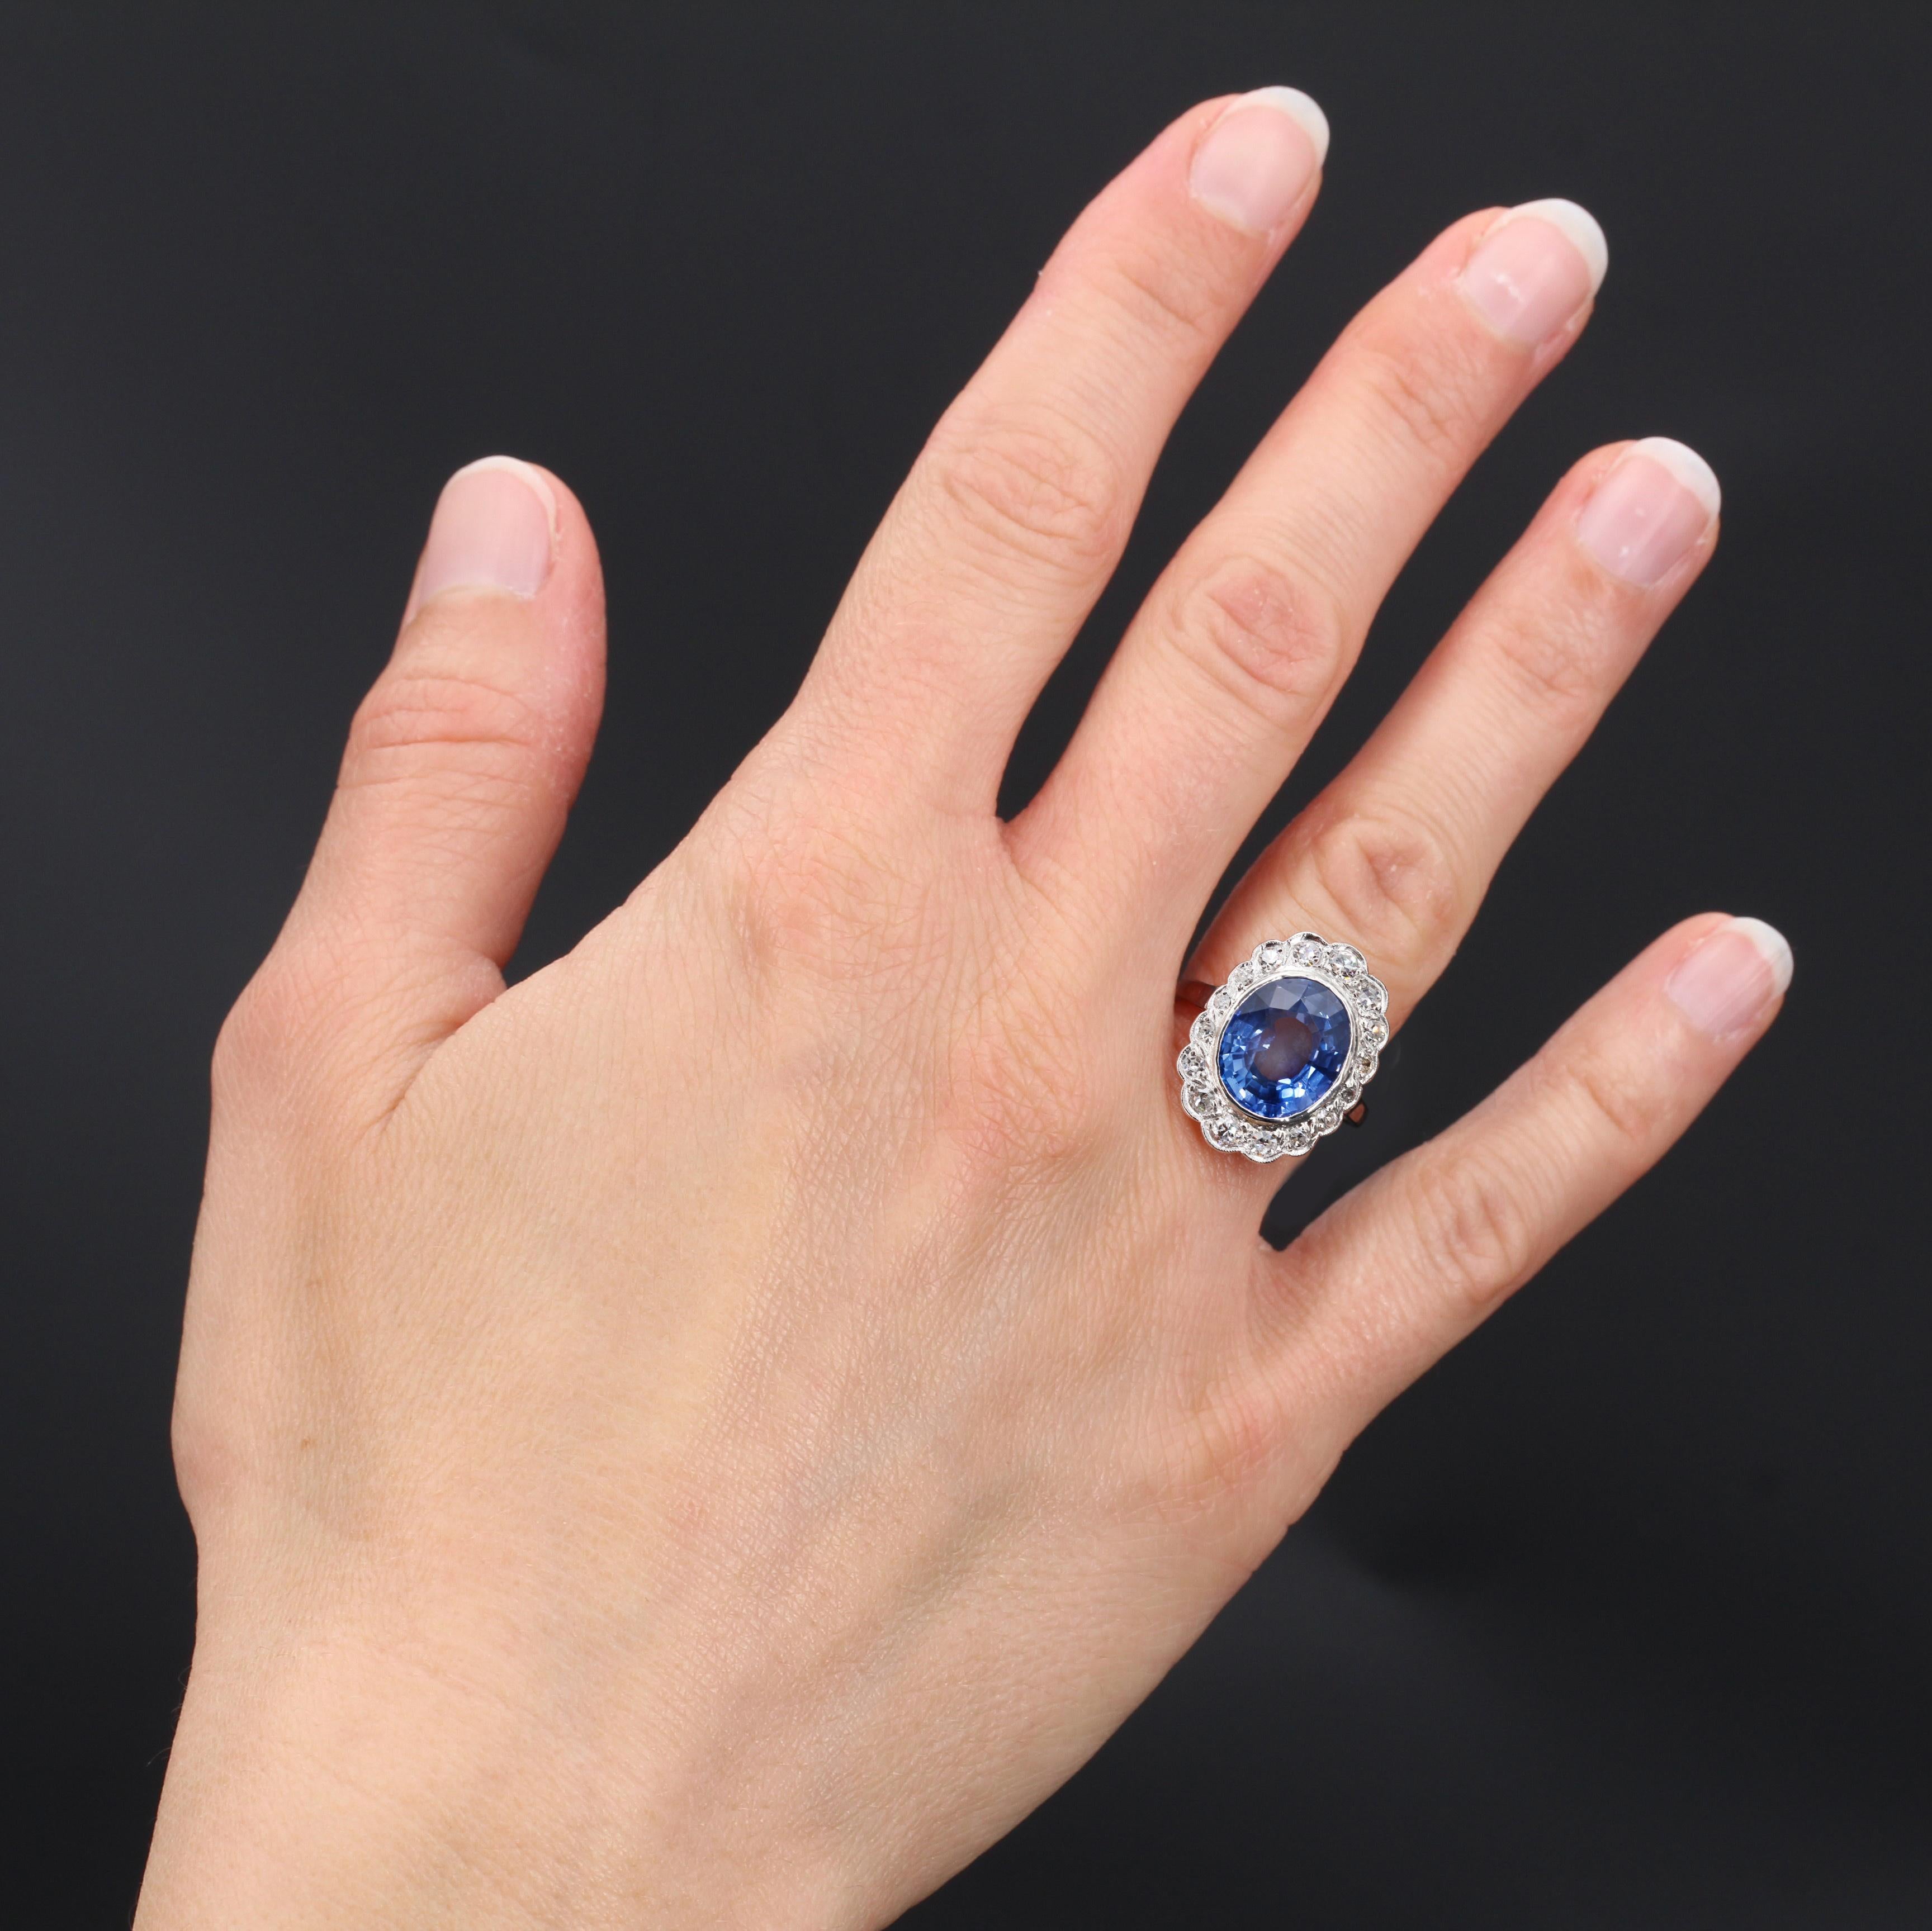 Ring in platinum, mascaron hallmark, and 18 karat white gold, owl hallmark.
Of oval shape, a light blue sapphire decorates the top surrounded by 8/8 cut and antique brilliant- cut diamonds.The basket is openwork.
Weight of the sapphire : 5,80 carats